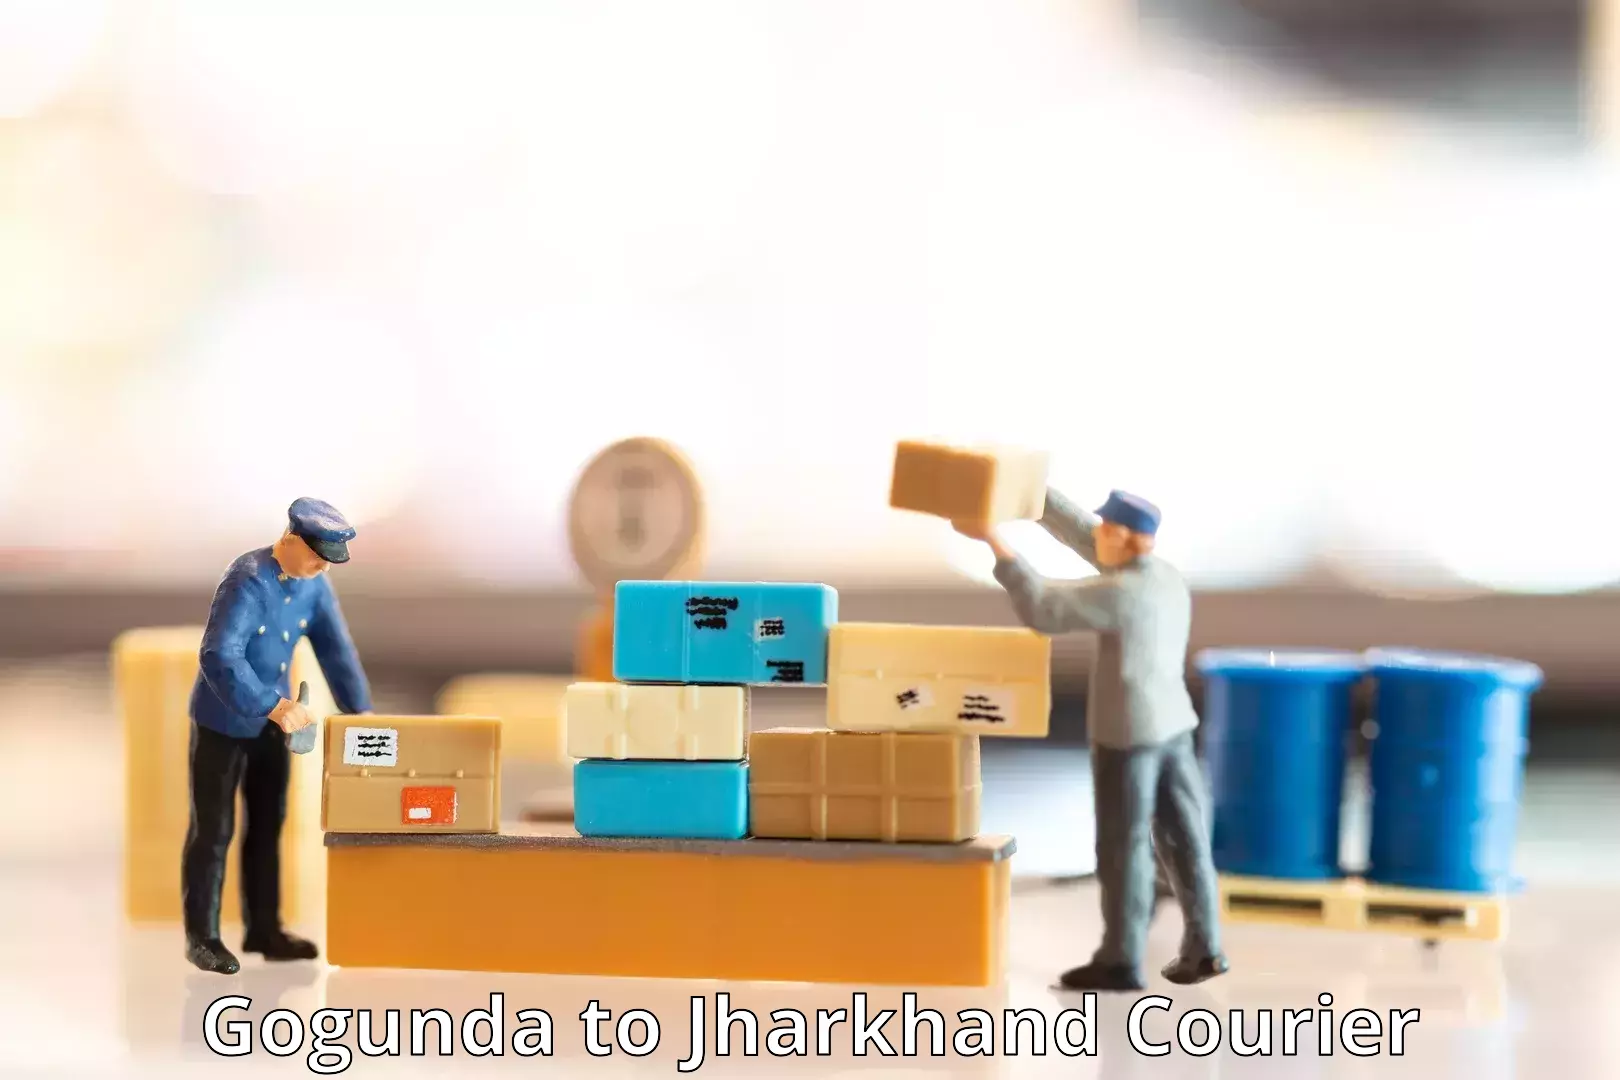 Round-the-clock parcel delivery Gogunda to Barkagaon